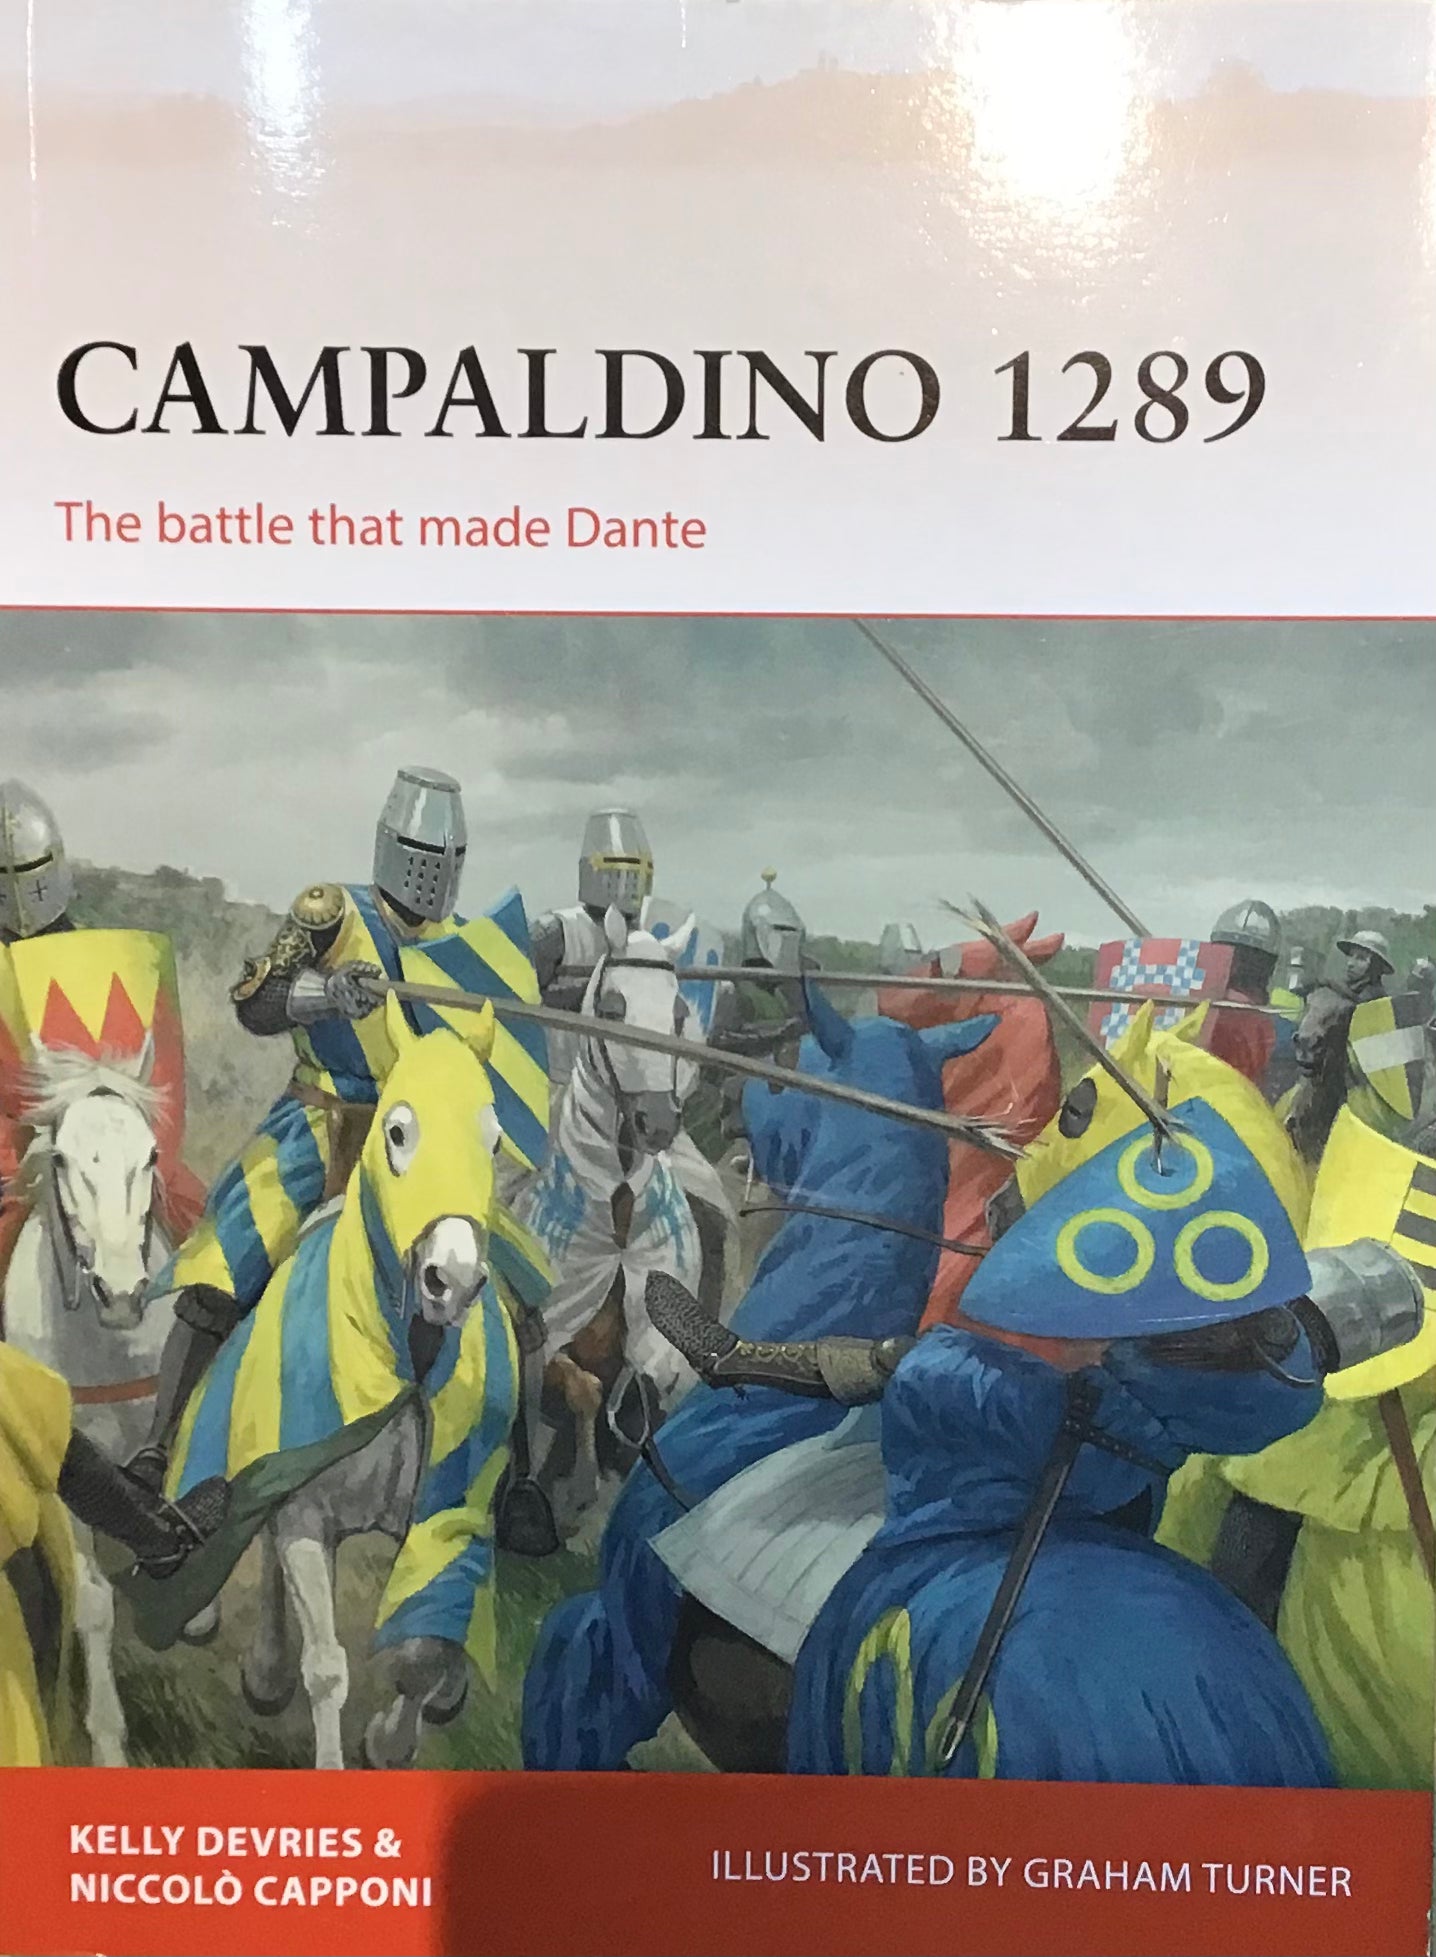 Campaldino 1289: The Battle That Made Dante by Kelly Devries & Niccolo Capponi and Graham Turner - Chester Model Centre